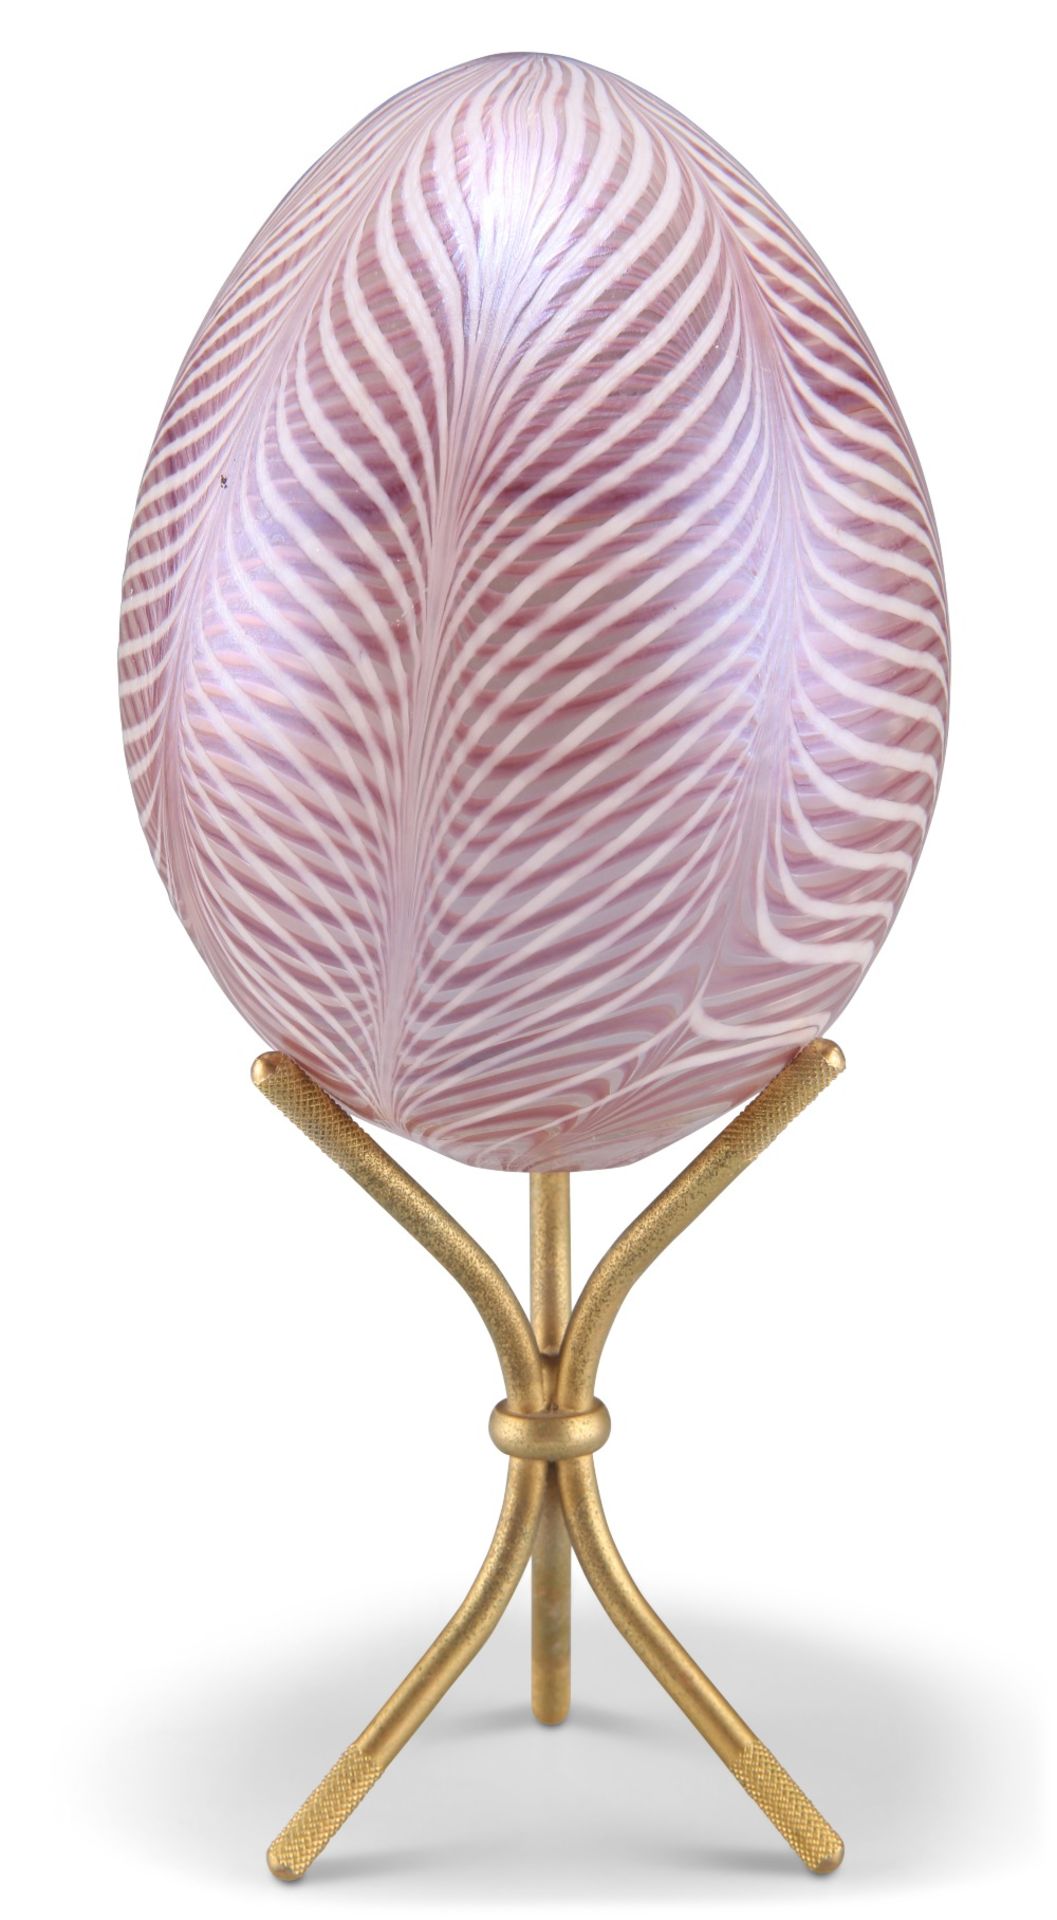 A DAUM GLASS EGG, of feather design, signed and indistinctly numbered, on a brass stand. 19cm high